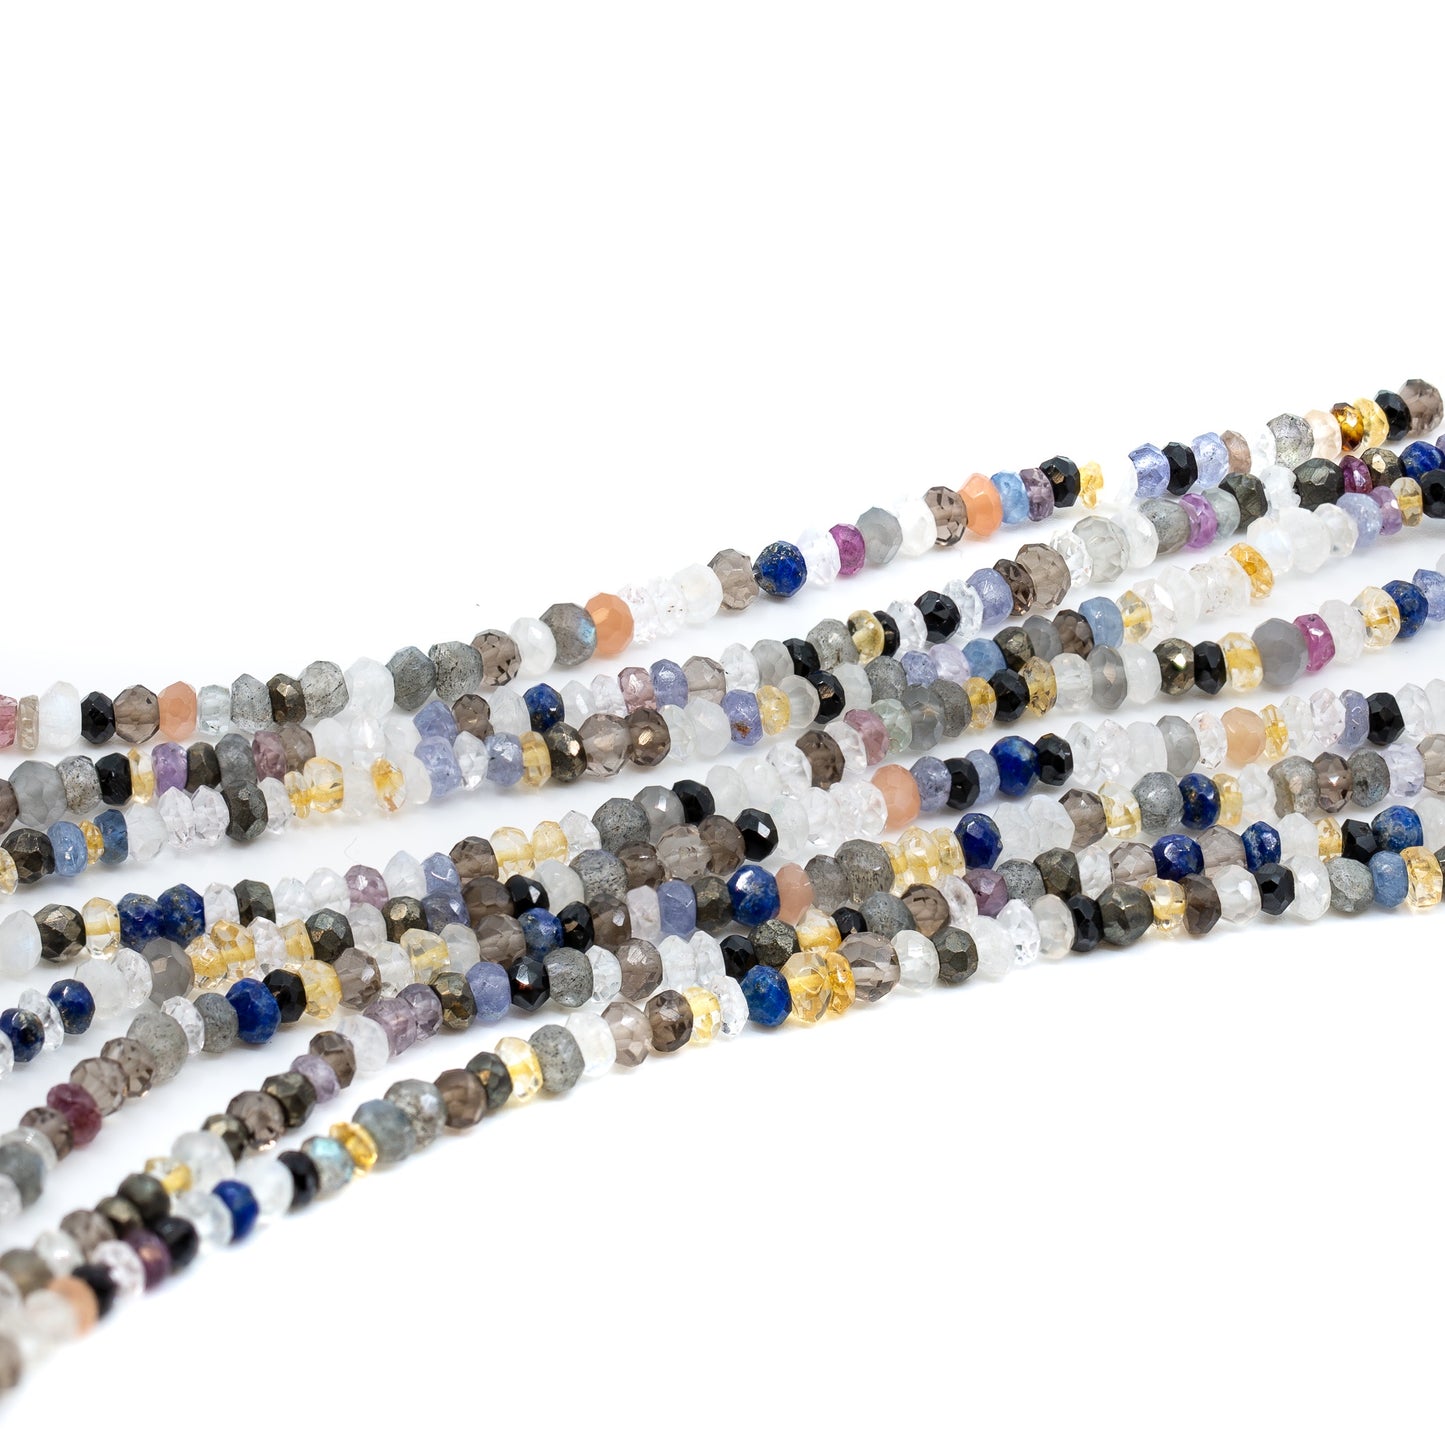 Mixed Gemstone Strand w/Sapphires - 3mm Faceted Rondelles